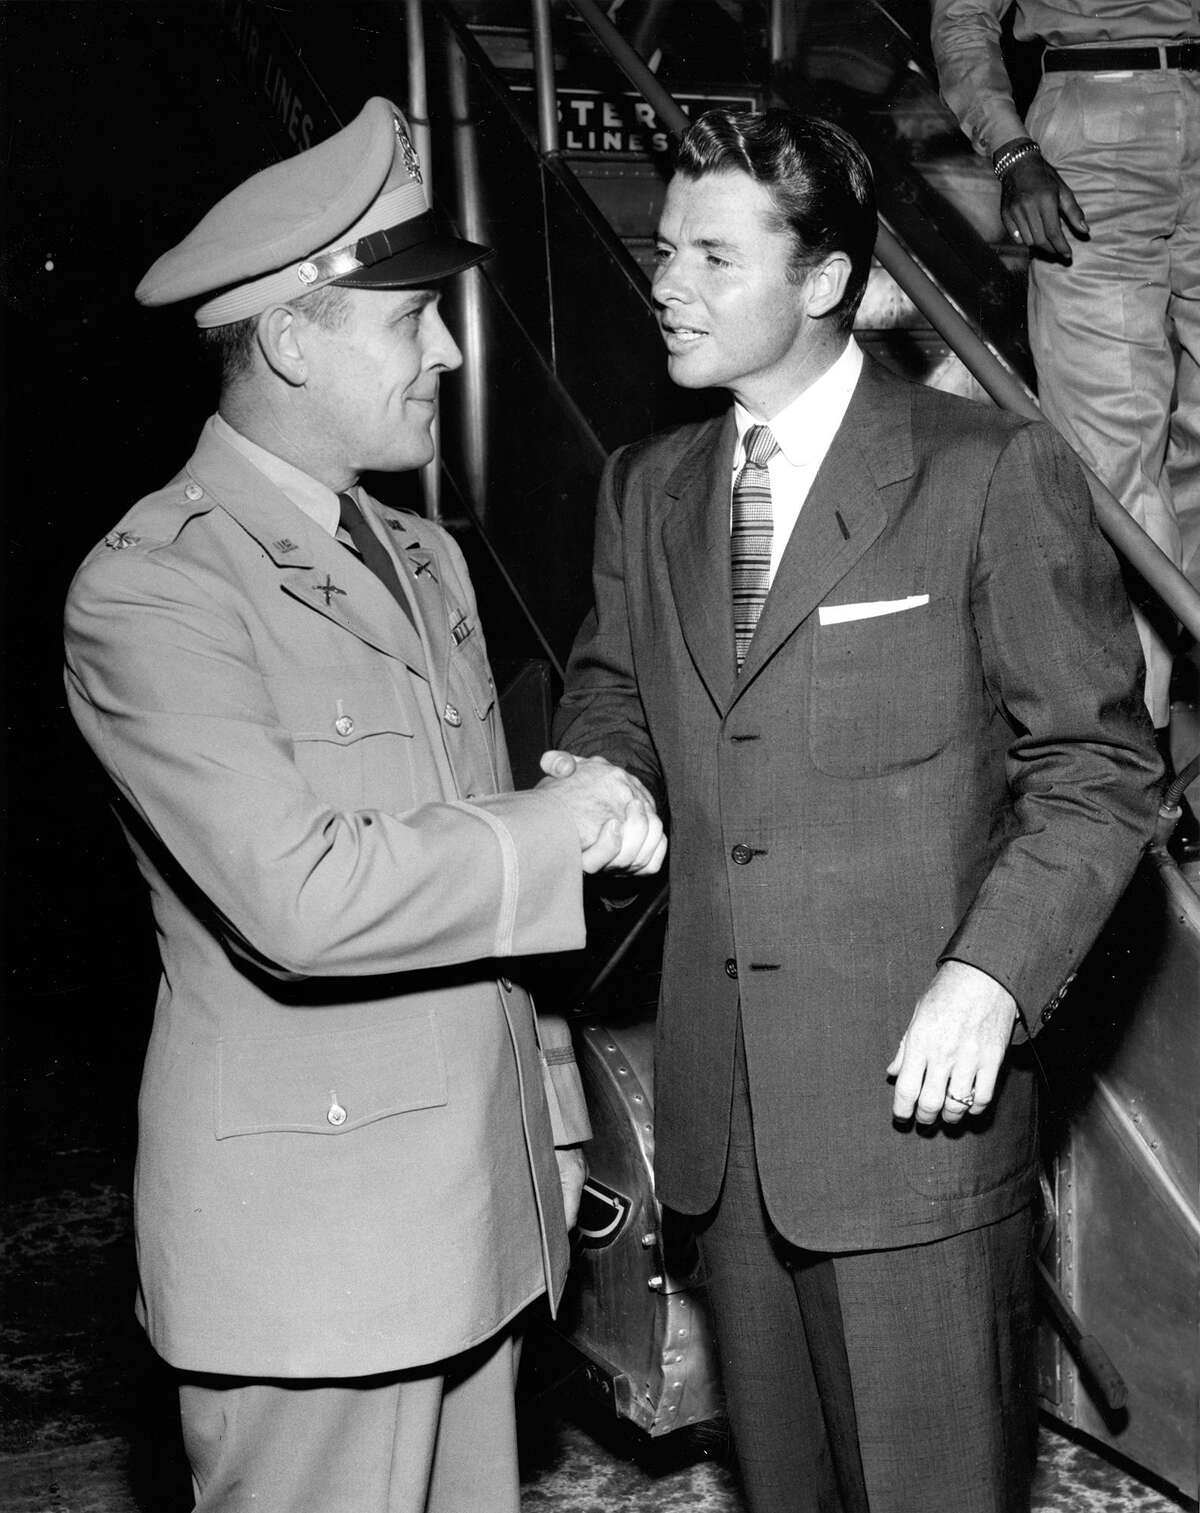 08/1955 - (R-L) Audie Murphy, Congressional Medal of Honor winner and star of the movie version of his adventures "To Hell and Back," was welcomed to Houston by Maj. Paul E. Butts, commanding officer of the Houston Recruiting Main Station when Murphy arrived at International Airport at midnight Wednesday by Eastern Air Lines from San Antonio. Murphy is in Houston for personal appearances at the Majestice Theater in connection with the premiere of his movie.